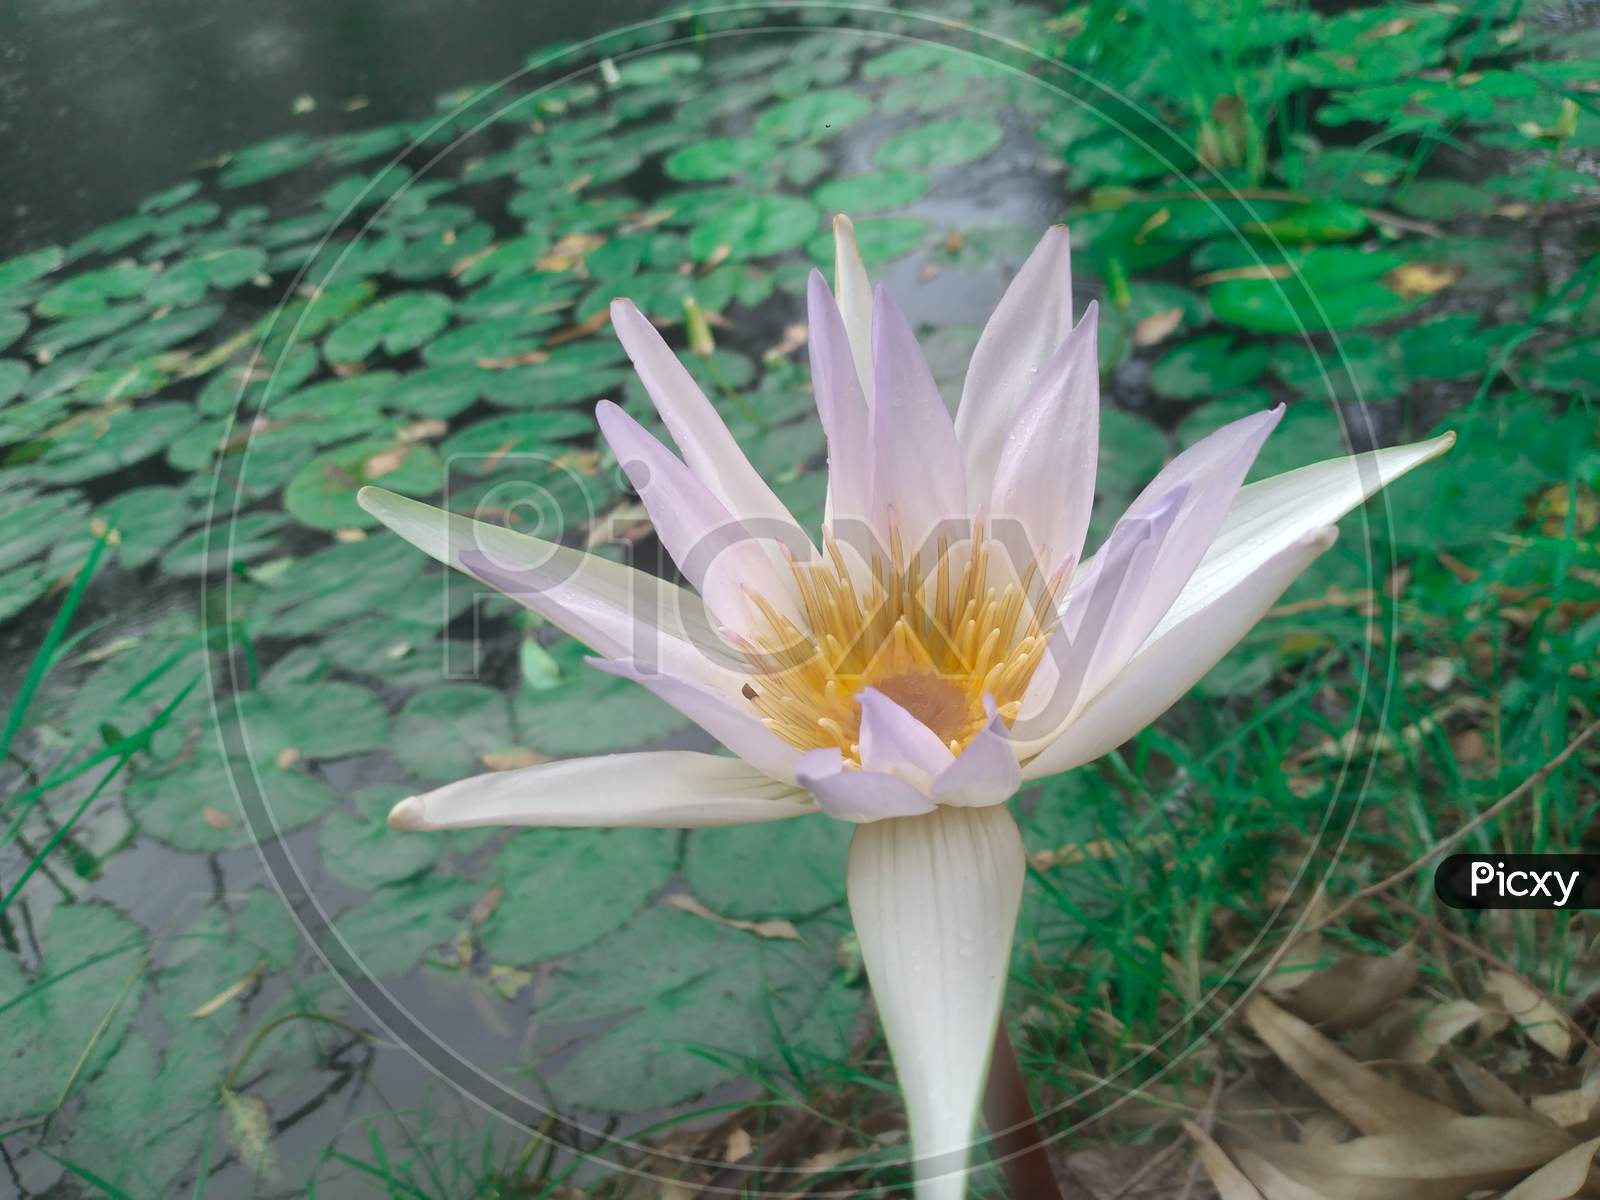 Nymphaea lotus, Egyptian white water-lily blooming at pond during summer, Selective focus.